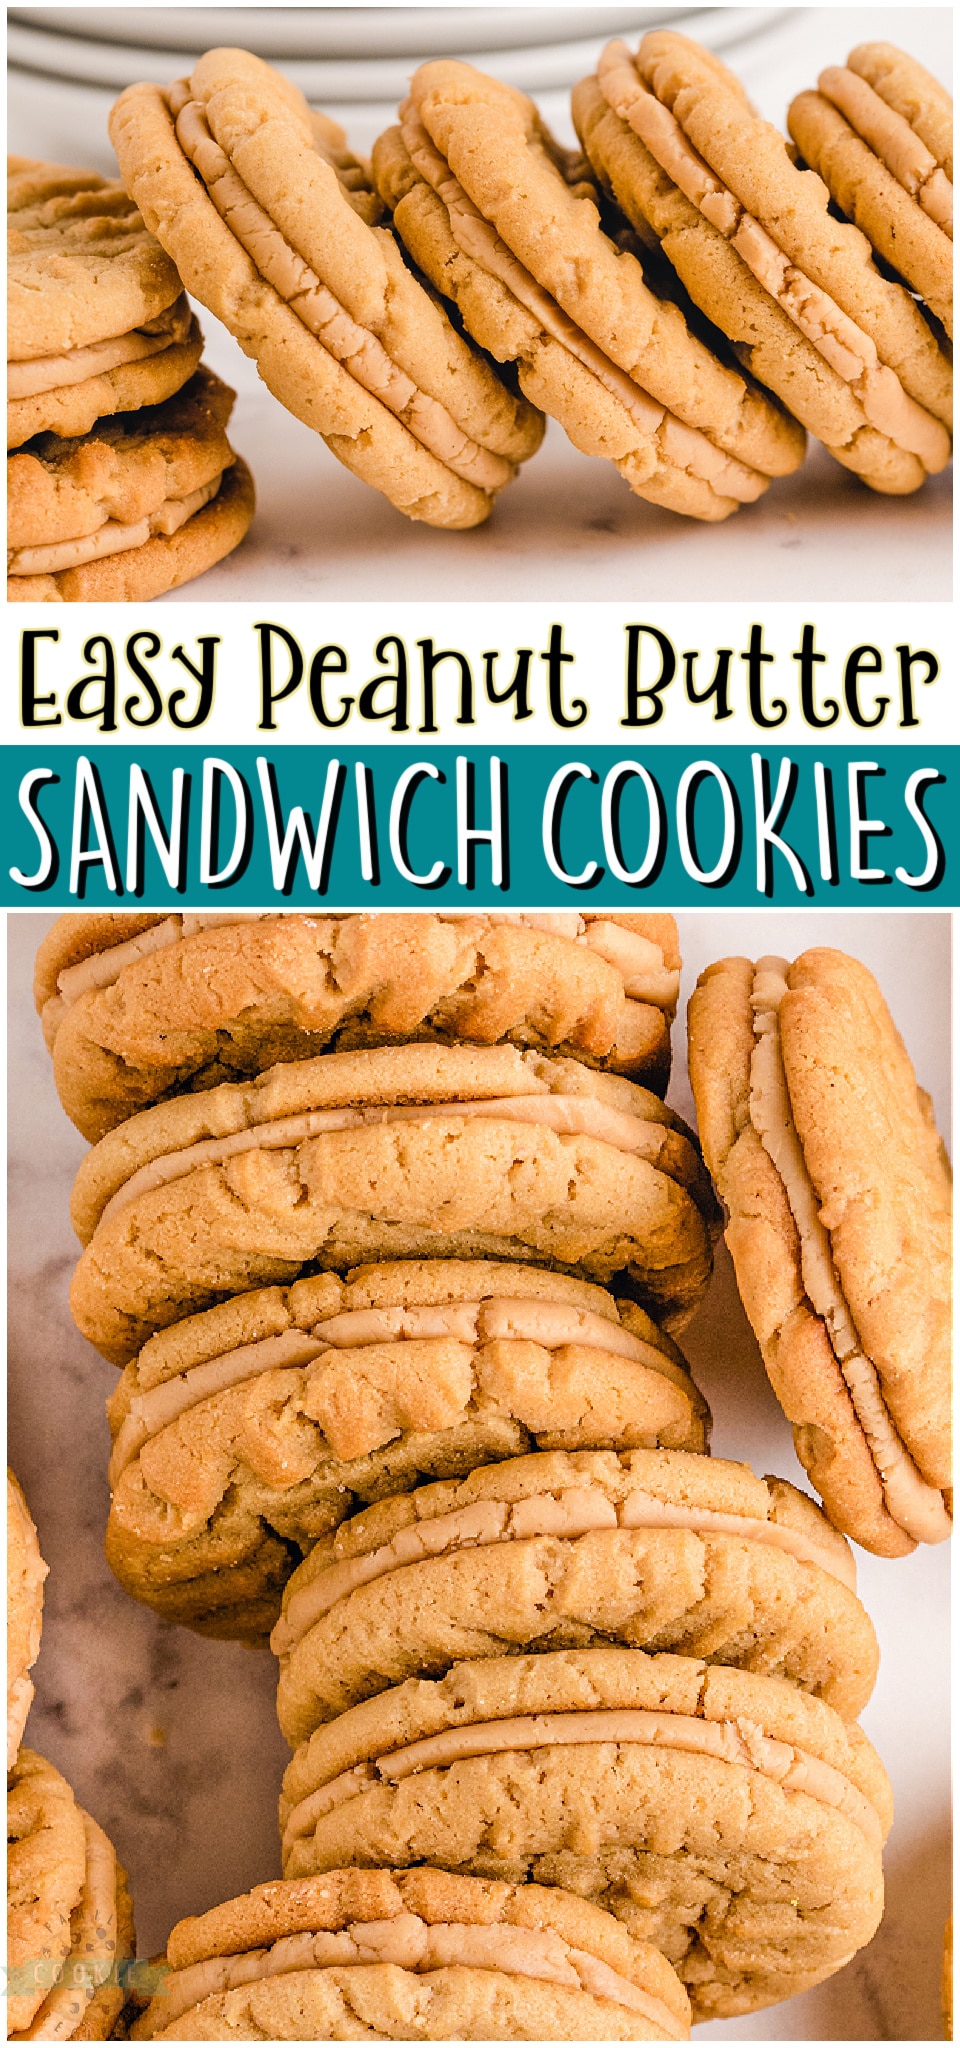 Peanut Butter Sandwich Cookies made with chewy peanut butter cookies & a creamy peanut butter filling. Peanut Butter lovers rejoice! We're sharing our homemade peanut butter cookie sandwiches that everyone goes crazy over! #peanutbutter #cookies #sandwichcookies #creamypeanutbutter #filling #dessert #baking #easyrecipe from FAMILY COOKIE RECIPES via @buttergirls